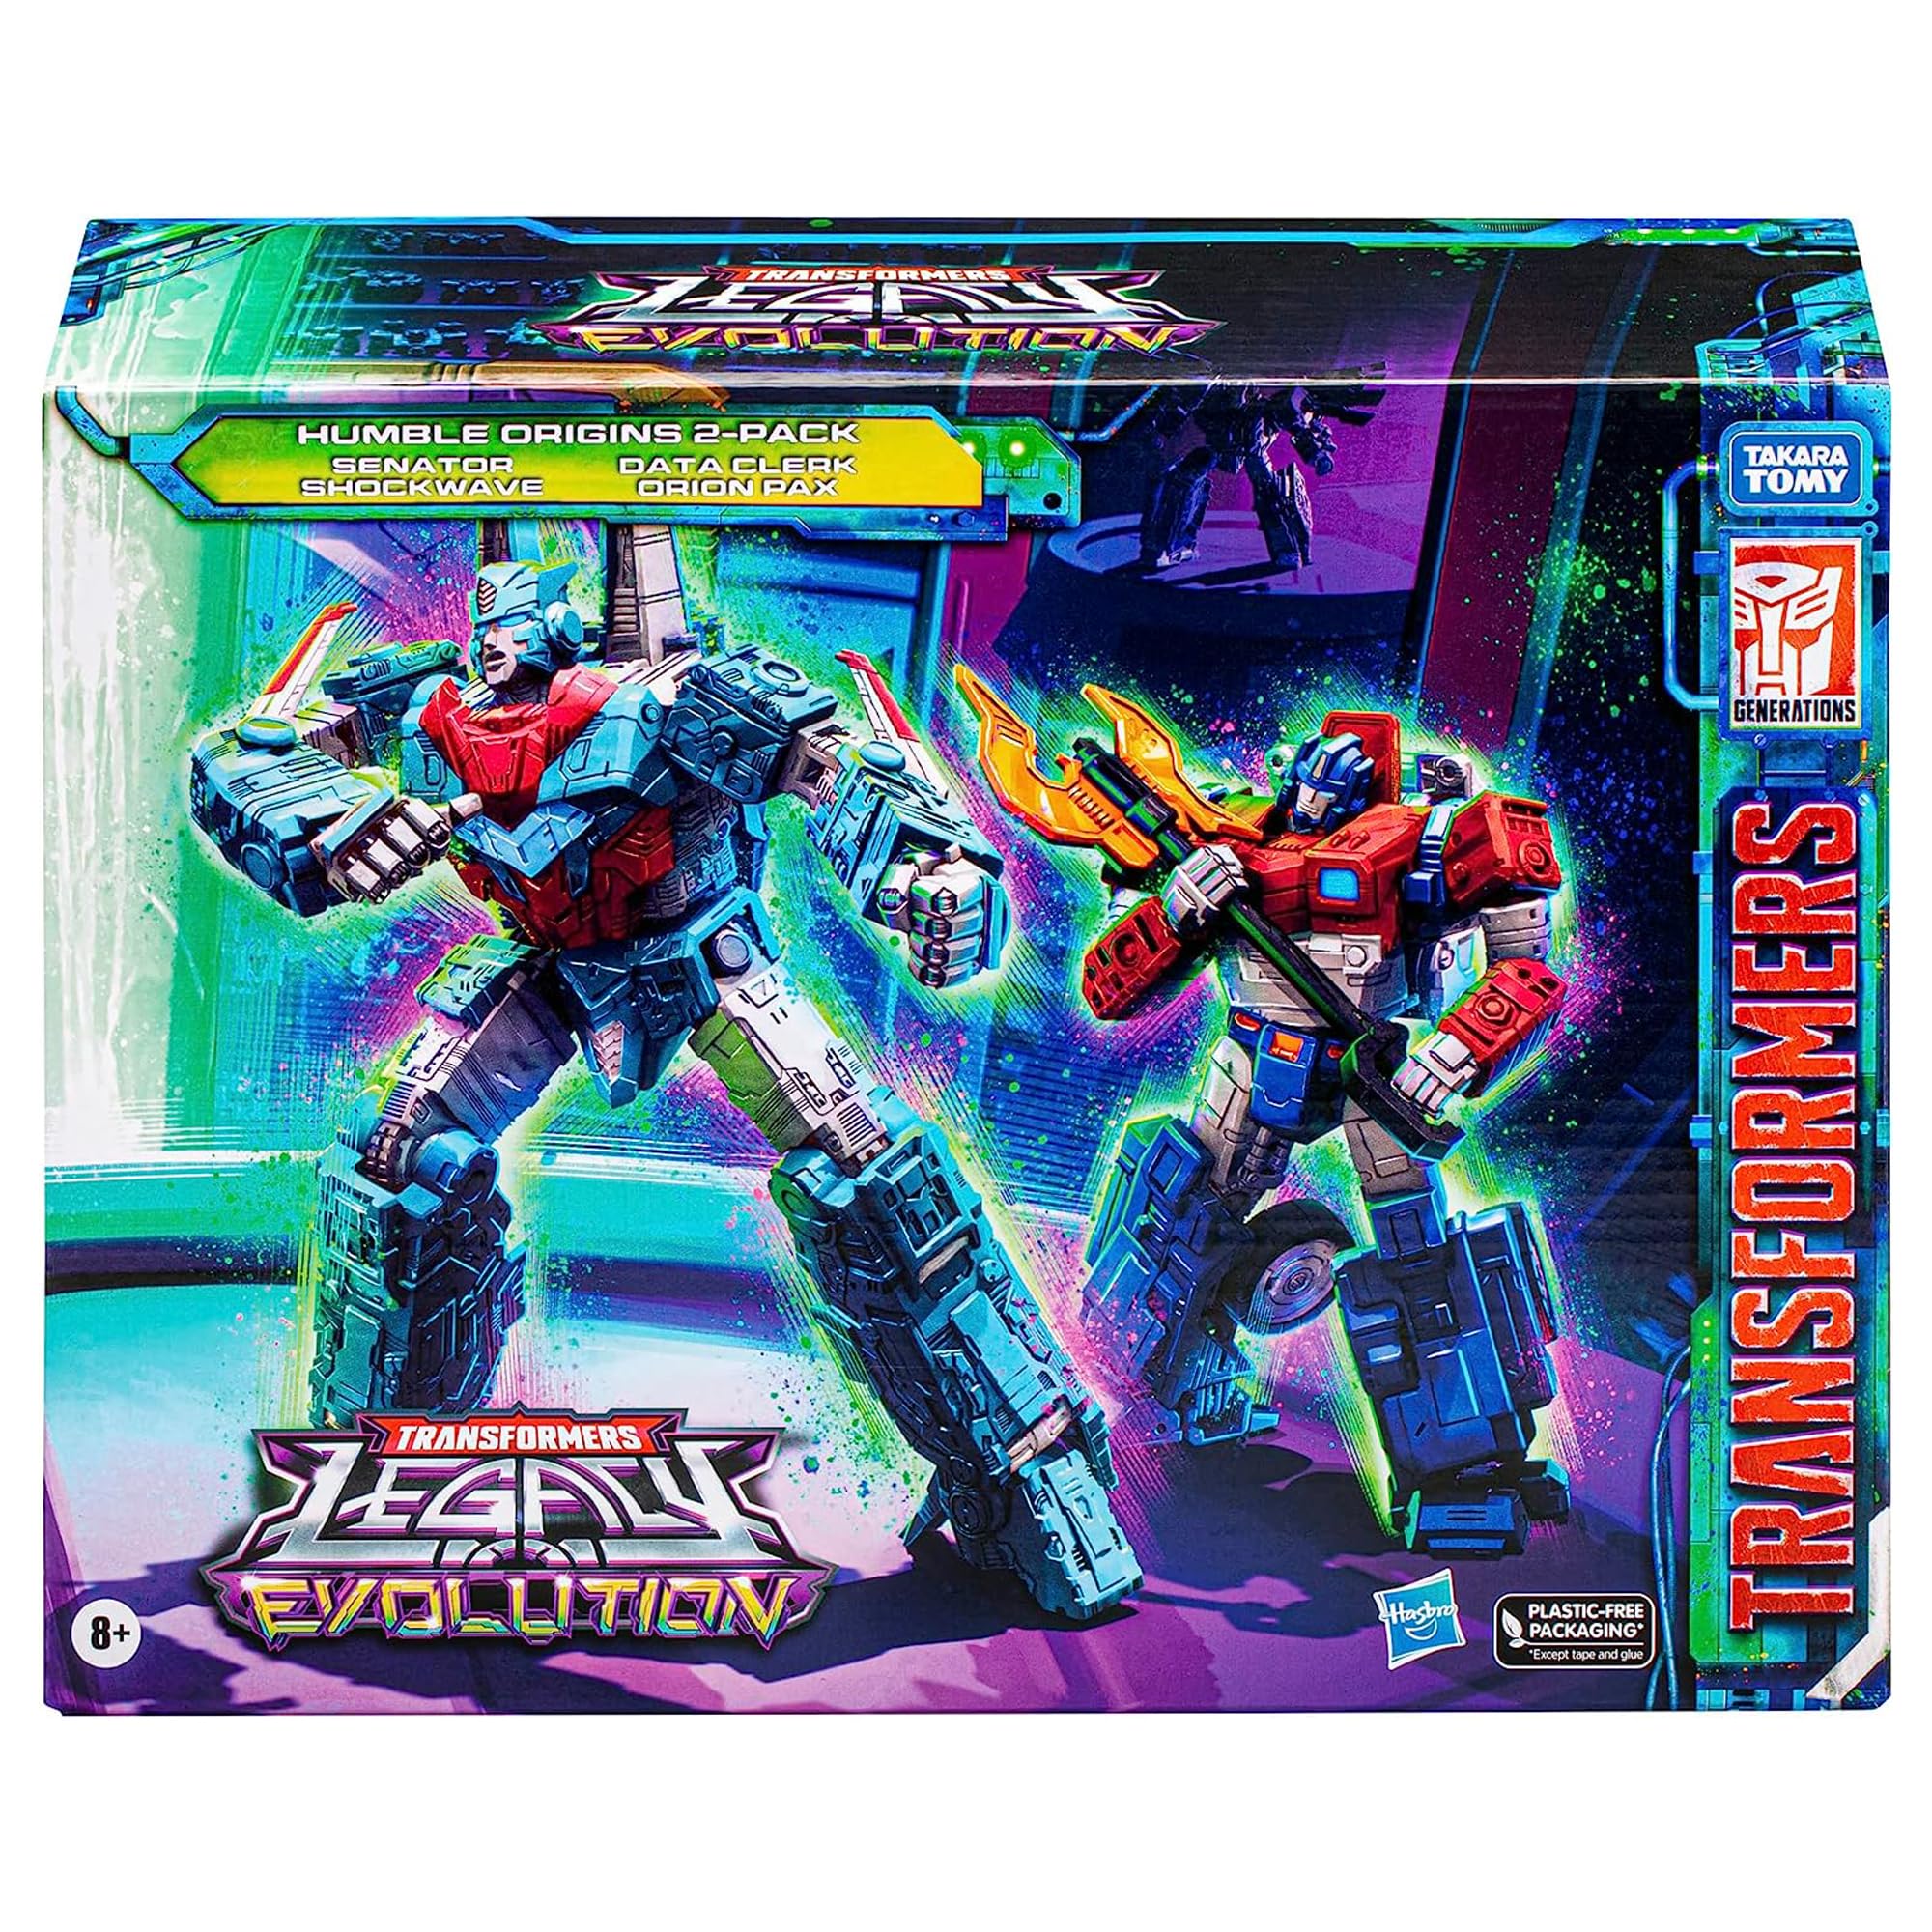 Transformers Toys Legacy Evolution Voyager Senator Shockwave & Deluxe Data Clerk Orion Pax Humble Origins 2-Pack, Action Figures for Boys and Girls Ages 8 and Up (Amazon Exclusive)